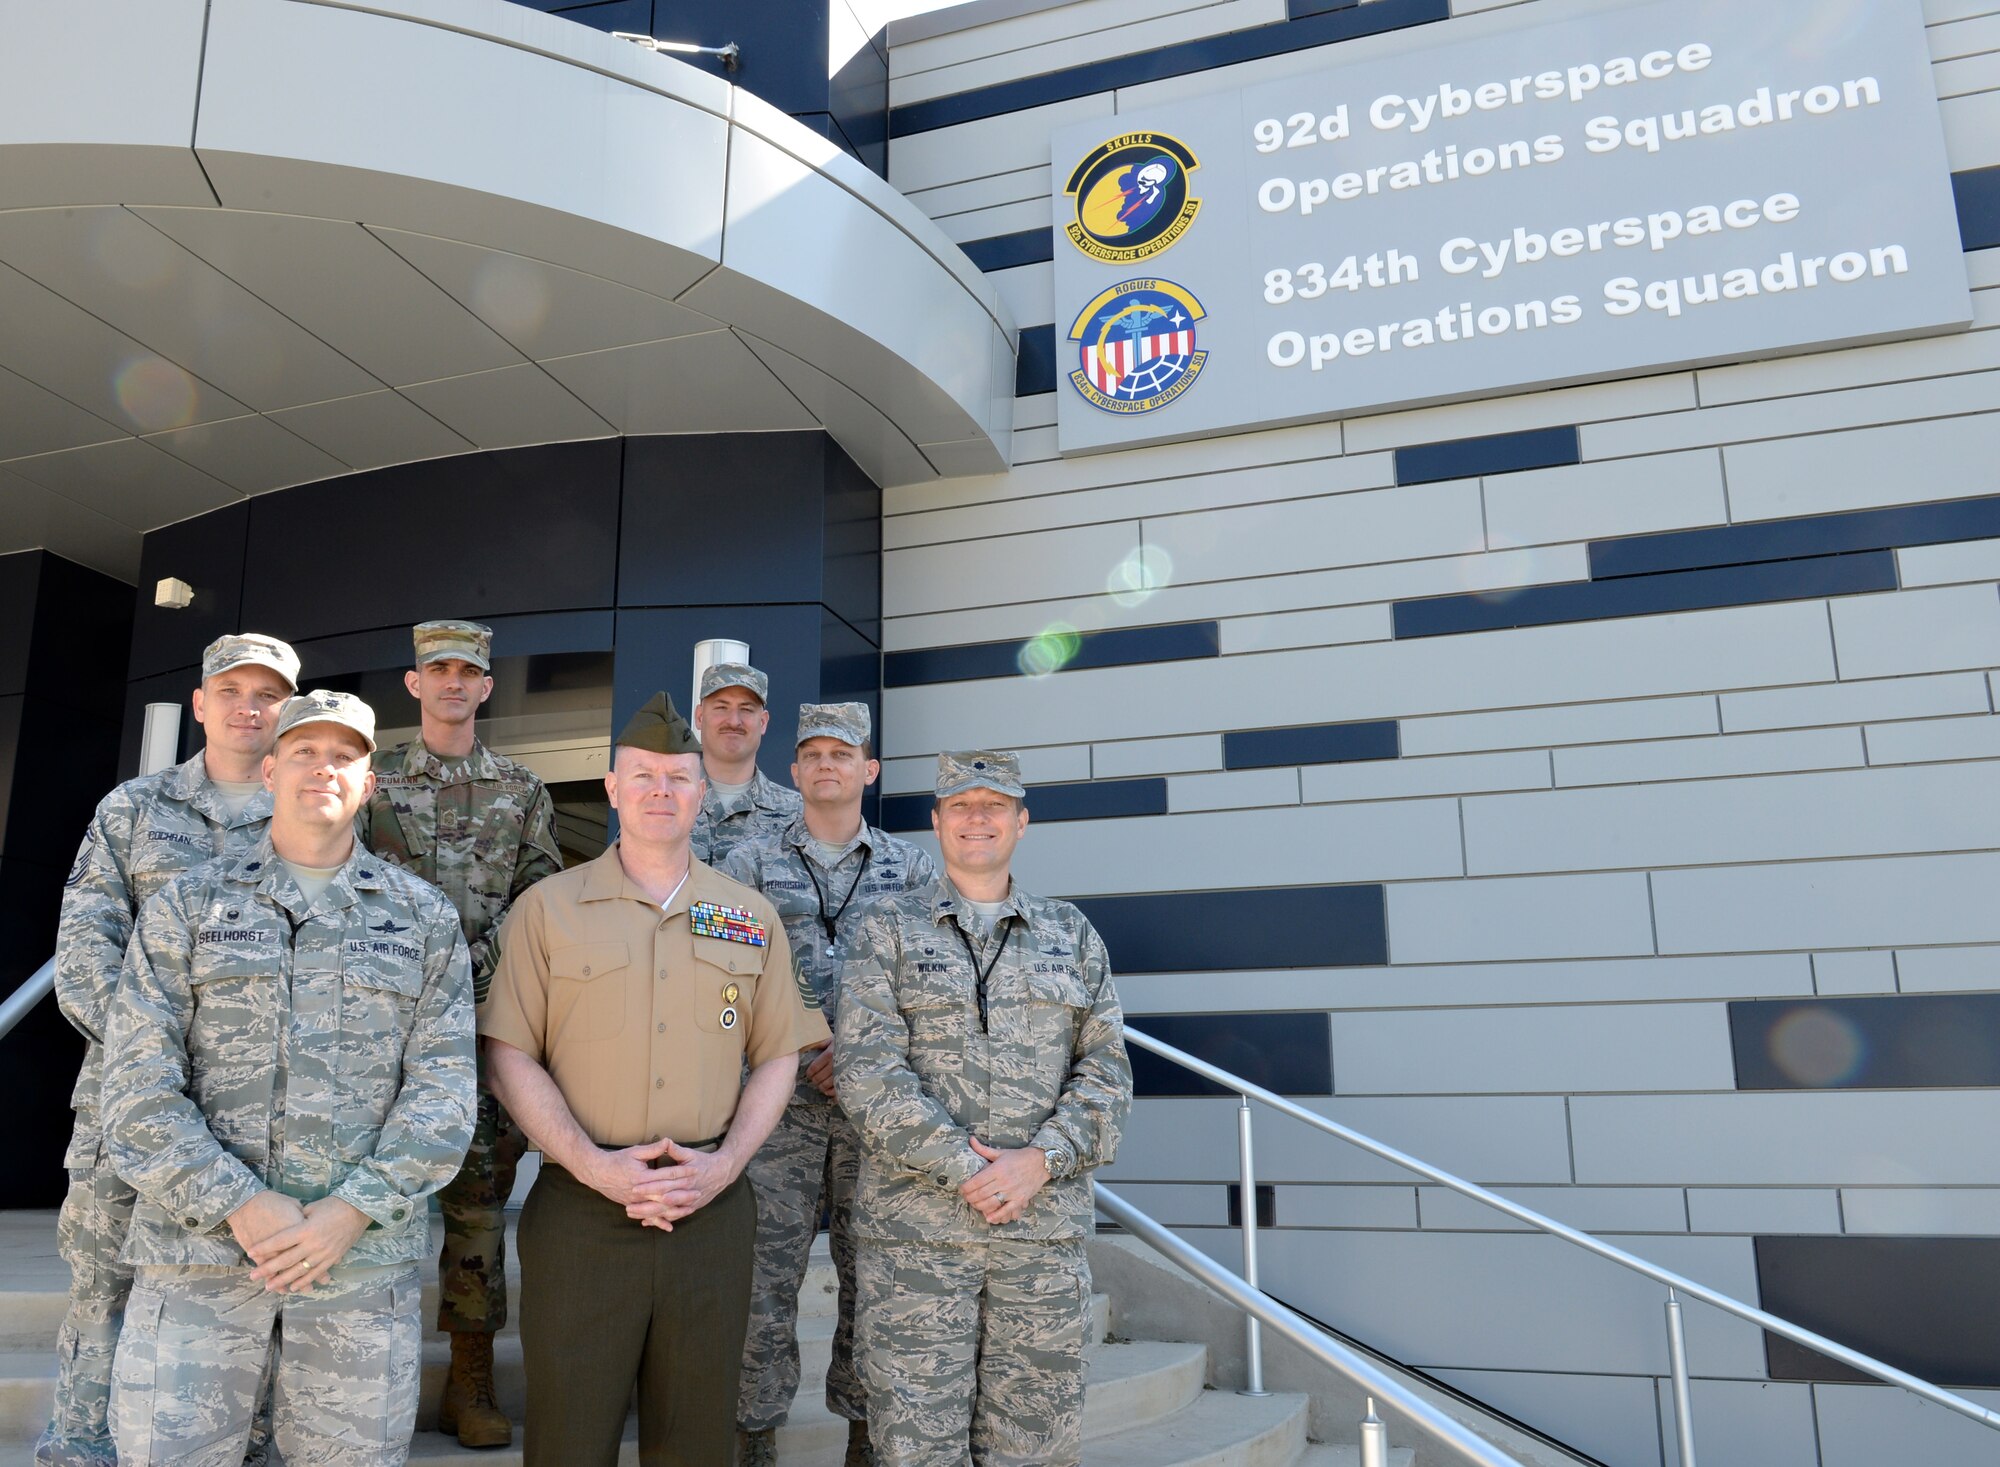 Master Gunnery Sgt. Scott Stalker, U.S. Cyber Command and National Security Agency command senior enlisted leader (center), along with 92nd and 834th Cyberspace Operations Squadron leaders pose for a photo at Joint Base San Antonio-Lackland, Texas, March 21, 2019. During his visit, Stalker met with cyber Airmen and learned more about their unit’s missions. (U.S. Air Force photo by Tech. Sgt. R.J. Biermann)